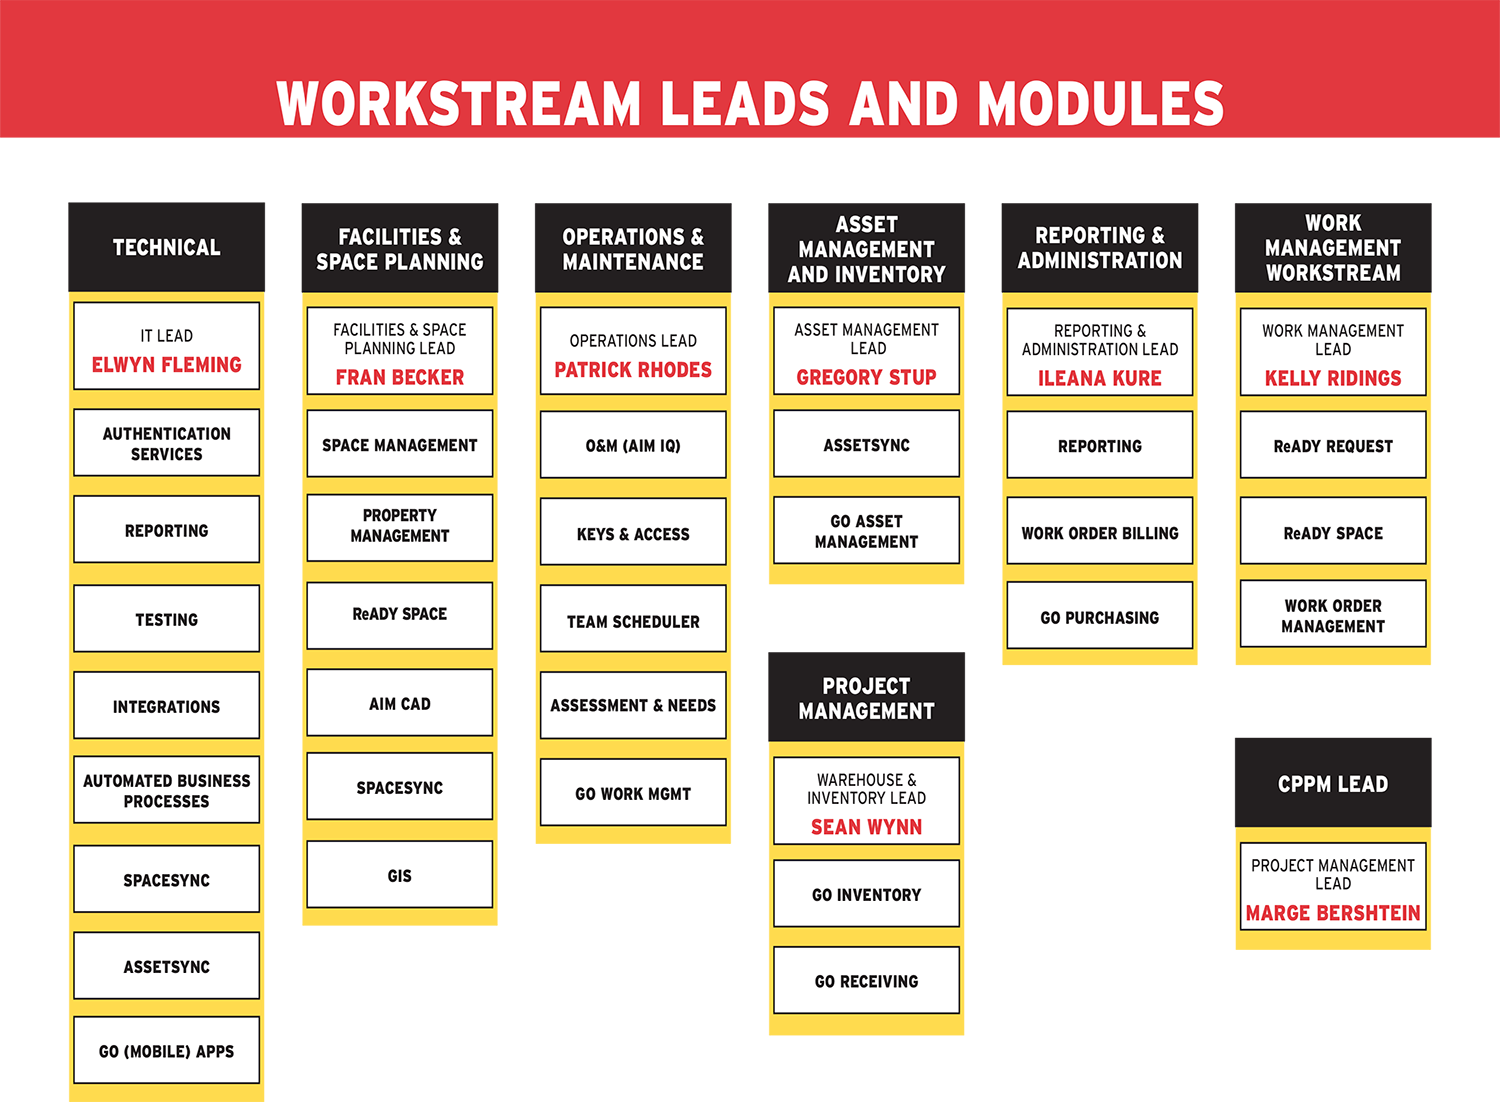 SHIFT Workstream Leads and Modules Diagram